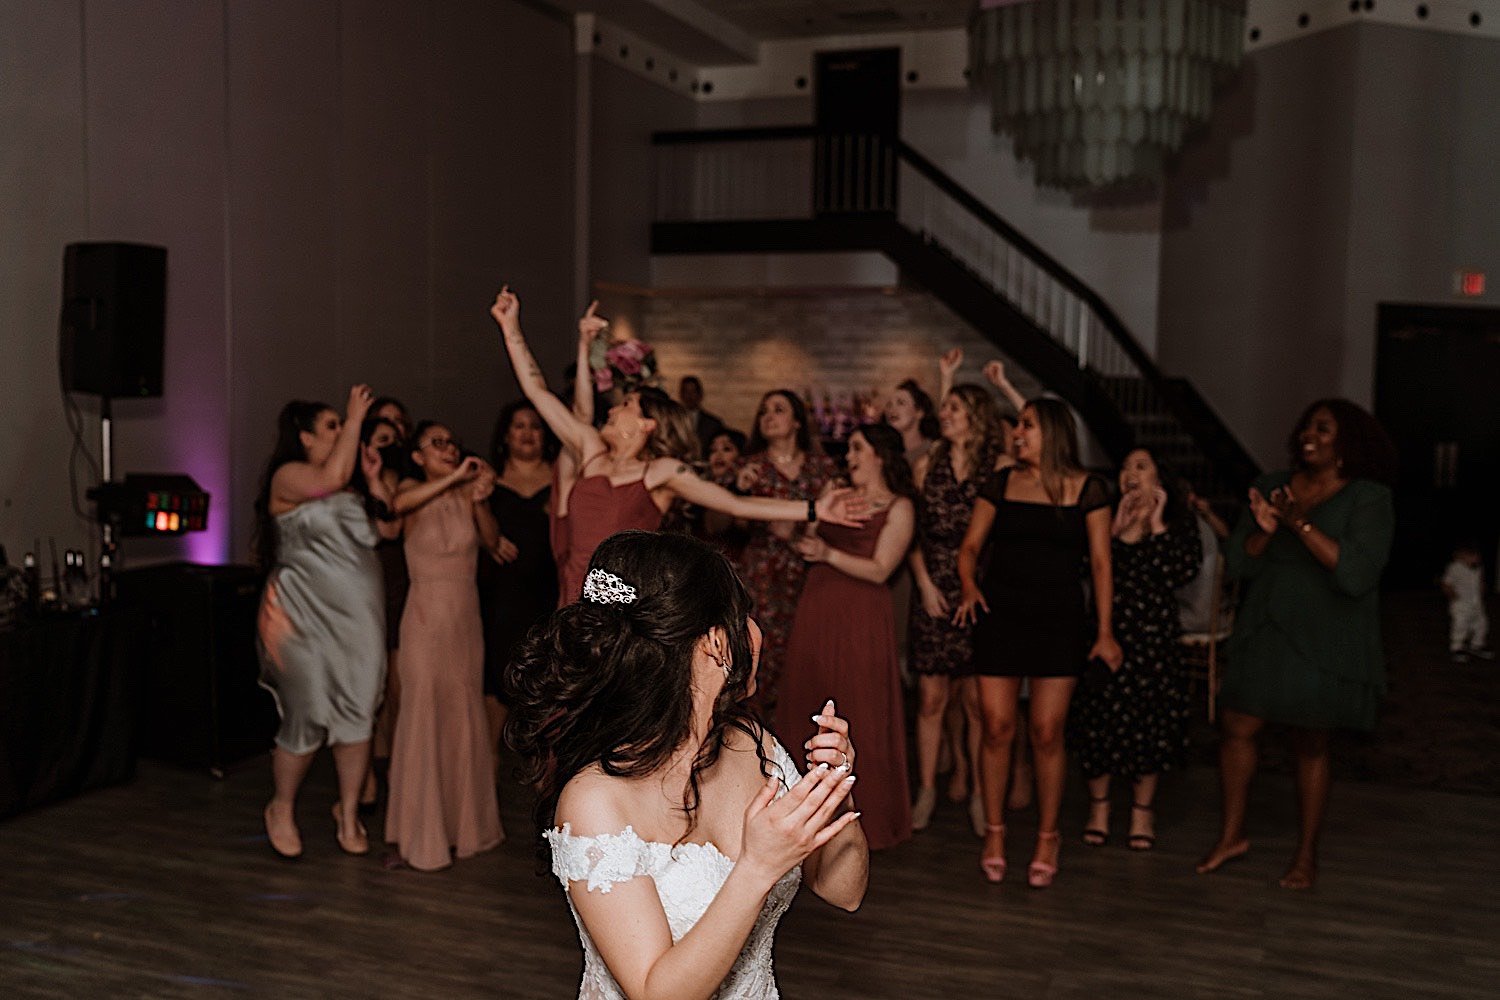 Bride tosses the bouquet to guests standing behind her during Chicagoland ballroom wedding reception